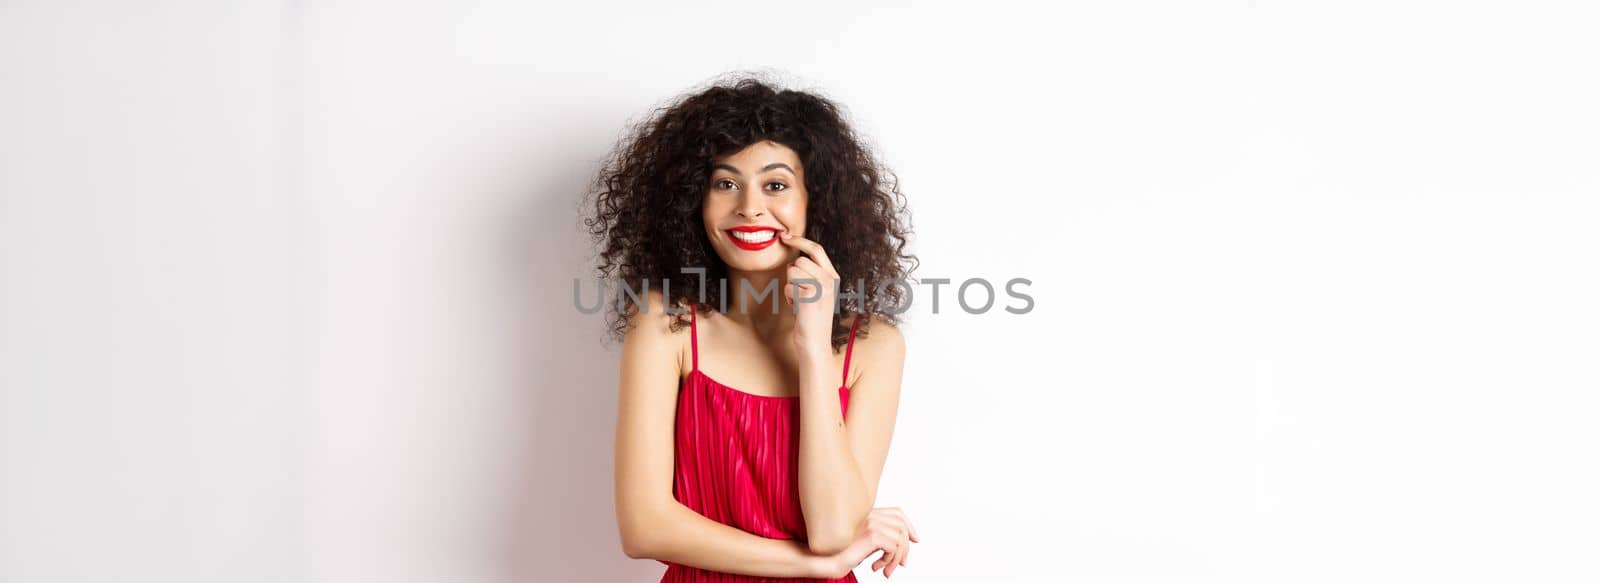 Excited beautiful woman in red dress, biting finger and smiling cute at camera, want something, standing on white background.